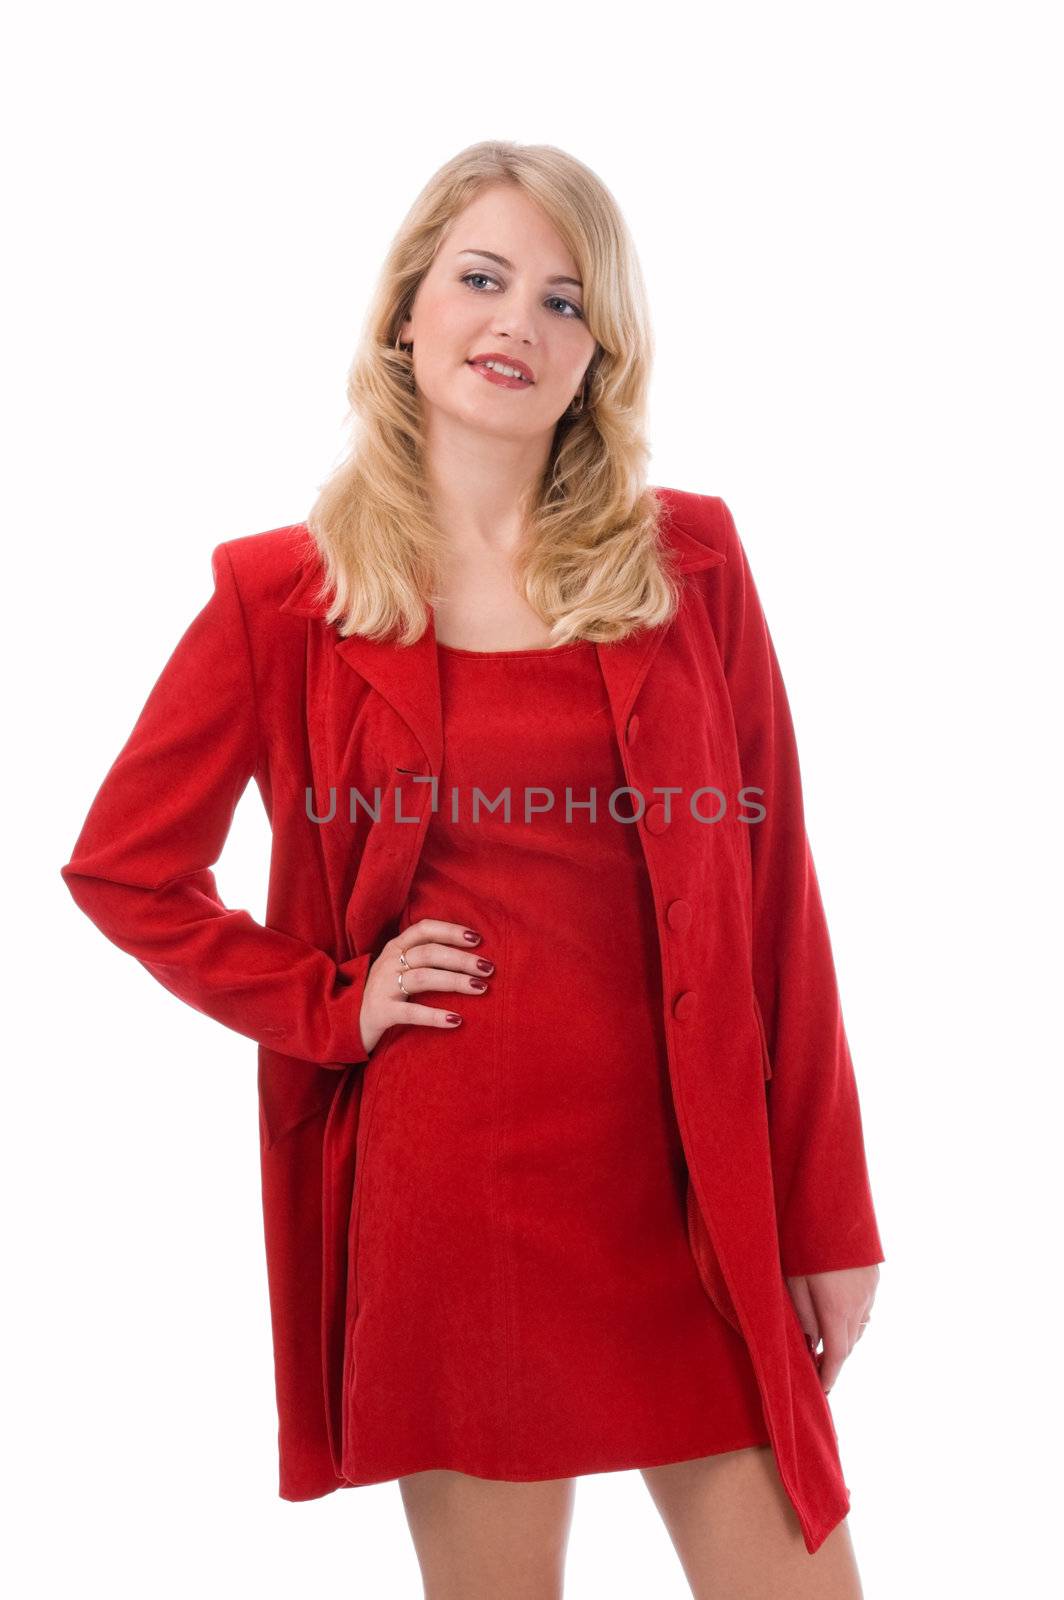 The young woman in a red coat by andyphoto